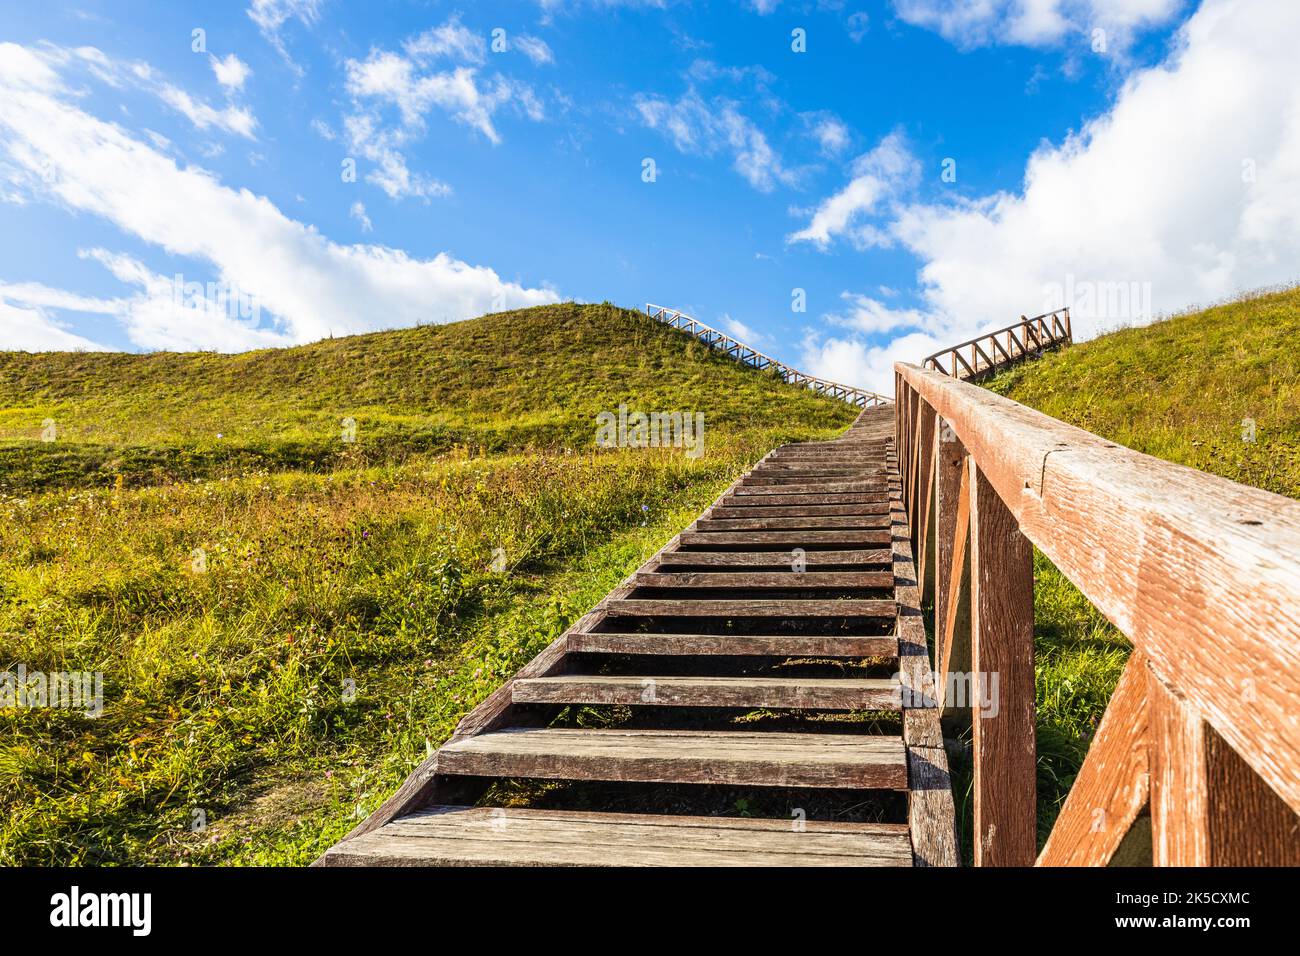 Wooden stairs going up to the historical mound of Seredzius, Lithuania Stock Photo